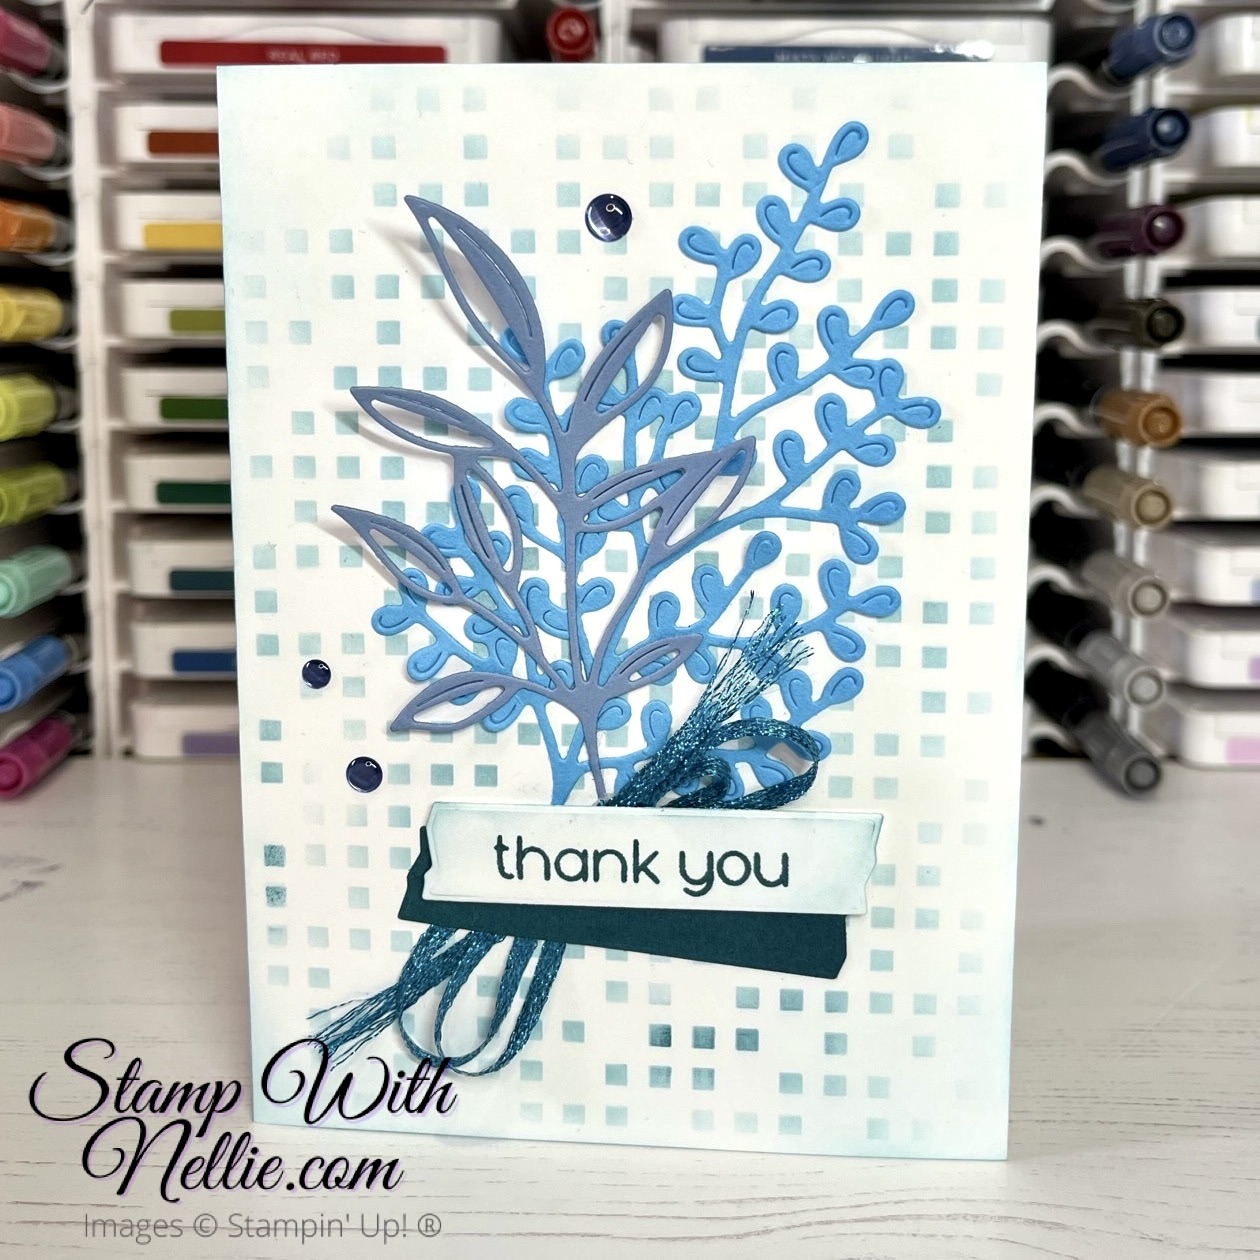 thank you card with 2 large blue die cut leaves, some ribbon and a thank you sentiment